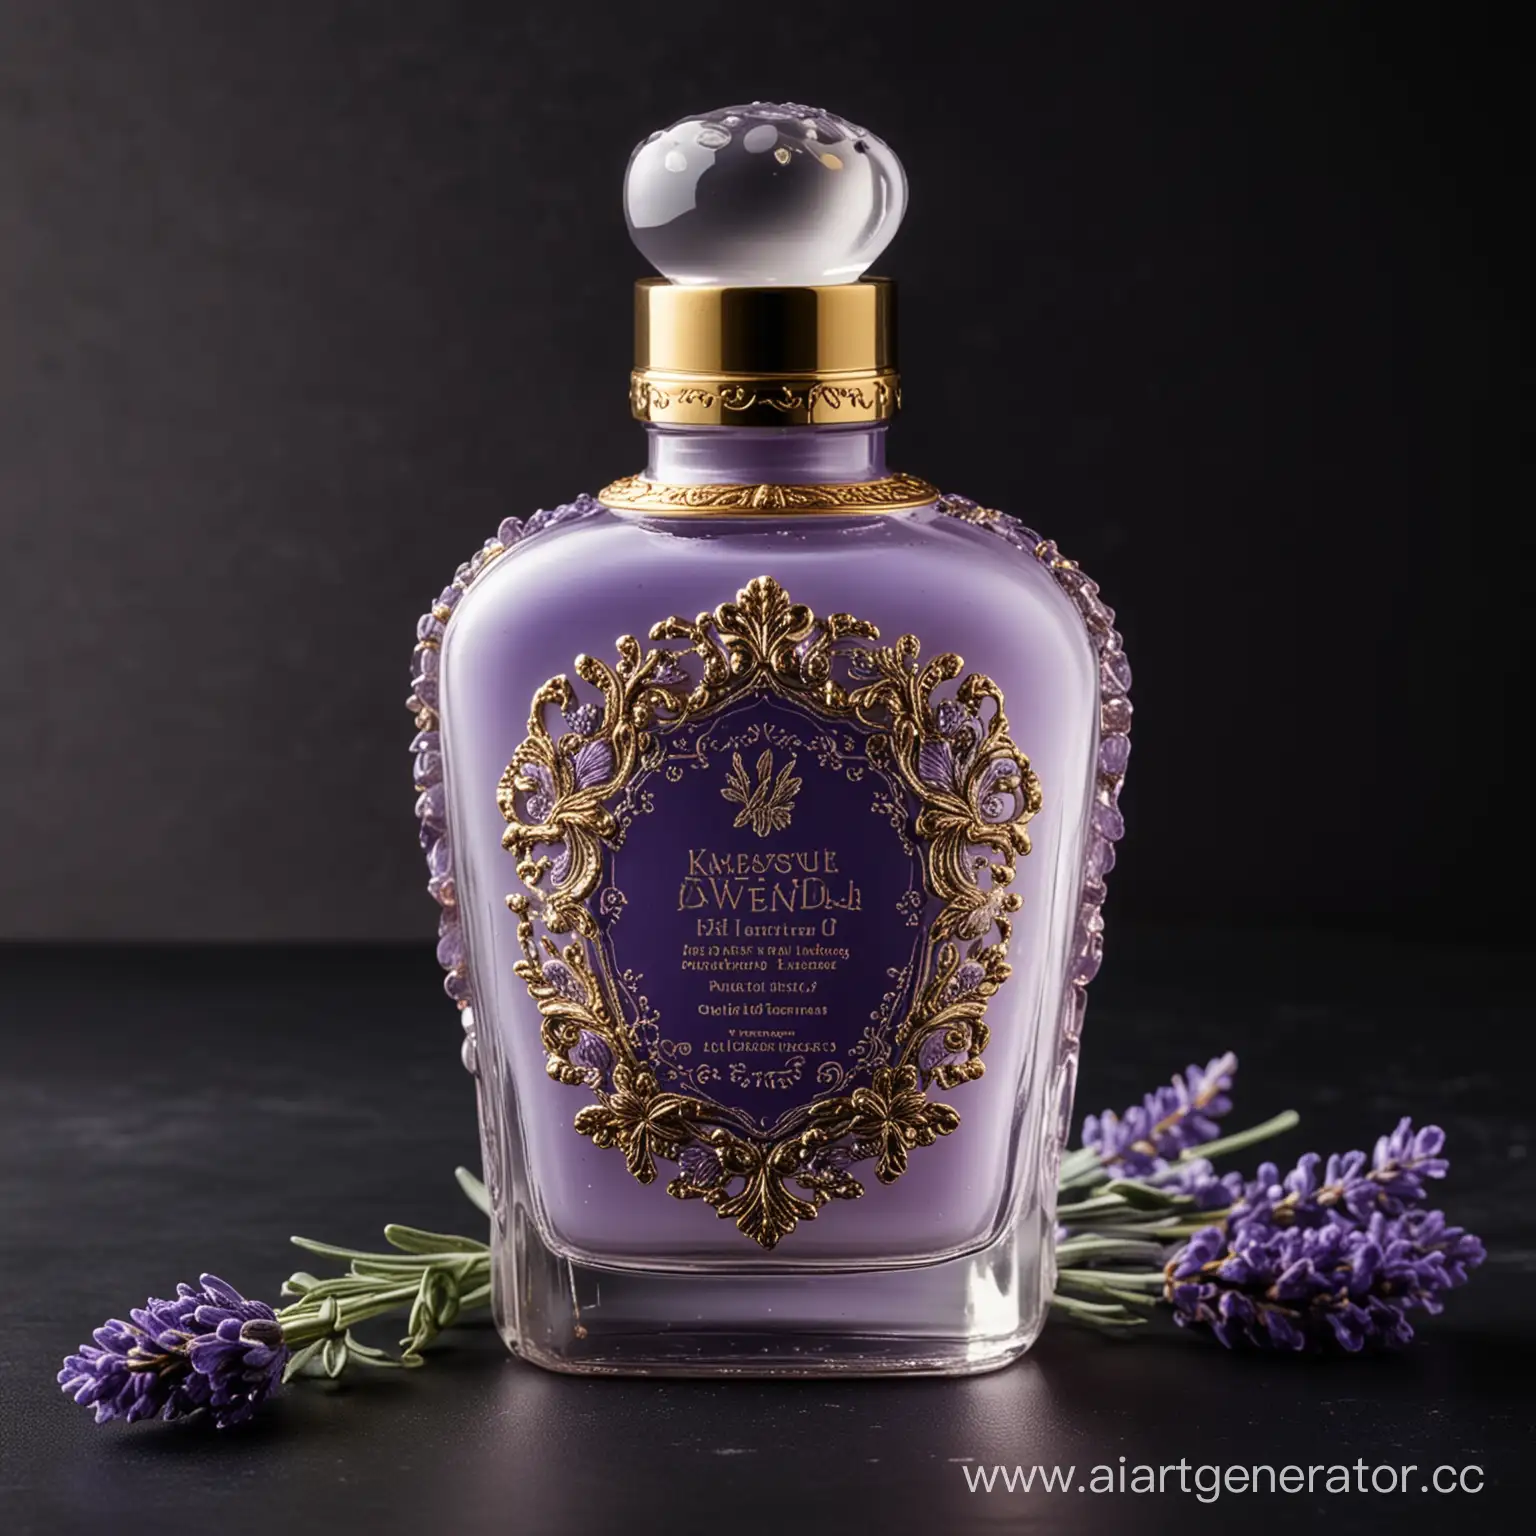 A visually stunning image of a luxurious lavender lotion bottle, standing prominently against a dark black background. The bottle is adorned with intricate gold designs, and it emits a soft, calming purple glow. The lotion appears rich and creamy, with tiny golden specks scattered throughout, capturing the essence of lavender. A delicate, translucent glass lid with an ornate handle rests gently on the bottle's opening.